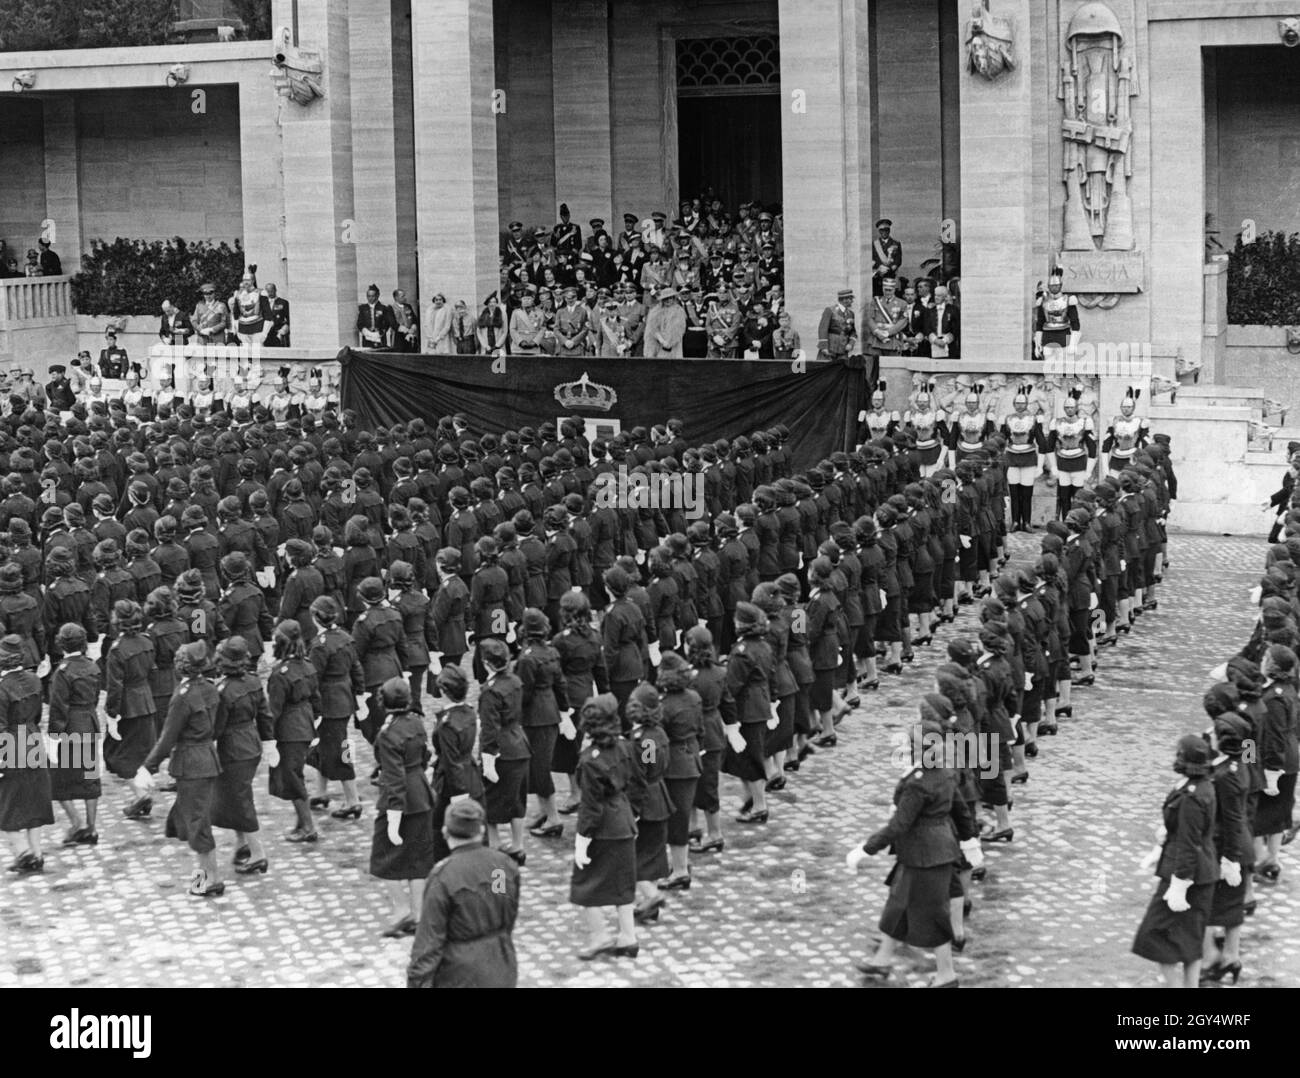 Adolf Hitler visited Italy, allied with Nazi Germany, at the beginning of May 1938. On Friday, May 6, 1938, a parade with 50000 soldiers and members of fascist organizations took place on the Via Trionfale (today Via di San Gregorio) in Rome. The picture shows the female fascist legion parading in rows of 24, passing the tribune. On the tribune are (from left to right): Benito Mussolini, Adolf Hitler, King Victor Emmanuel III of Italy and his wife, Elena of Montenegro. Behind them line up other greats of both fascist states. [automated translation] Stock Photo